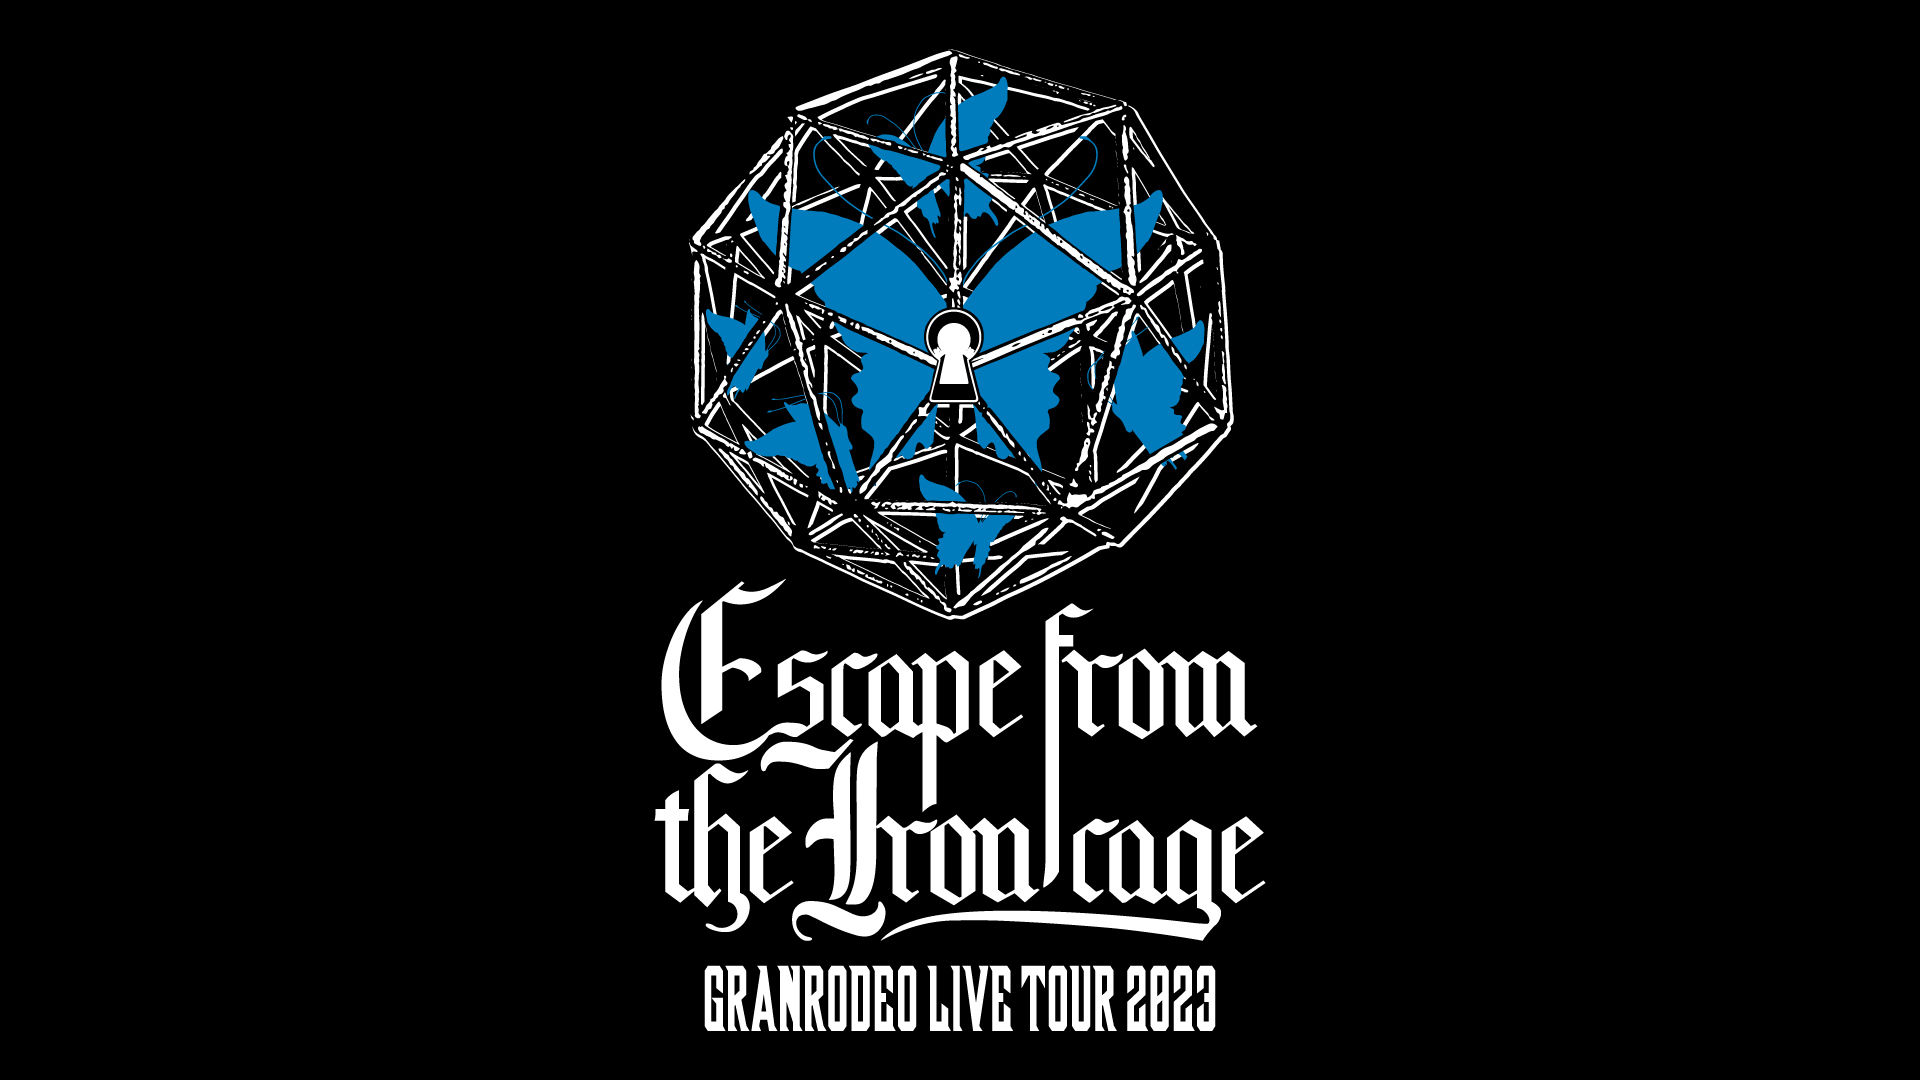 GRANRODEO LIVE TOUR 2023 “Escape from the Iron cage”